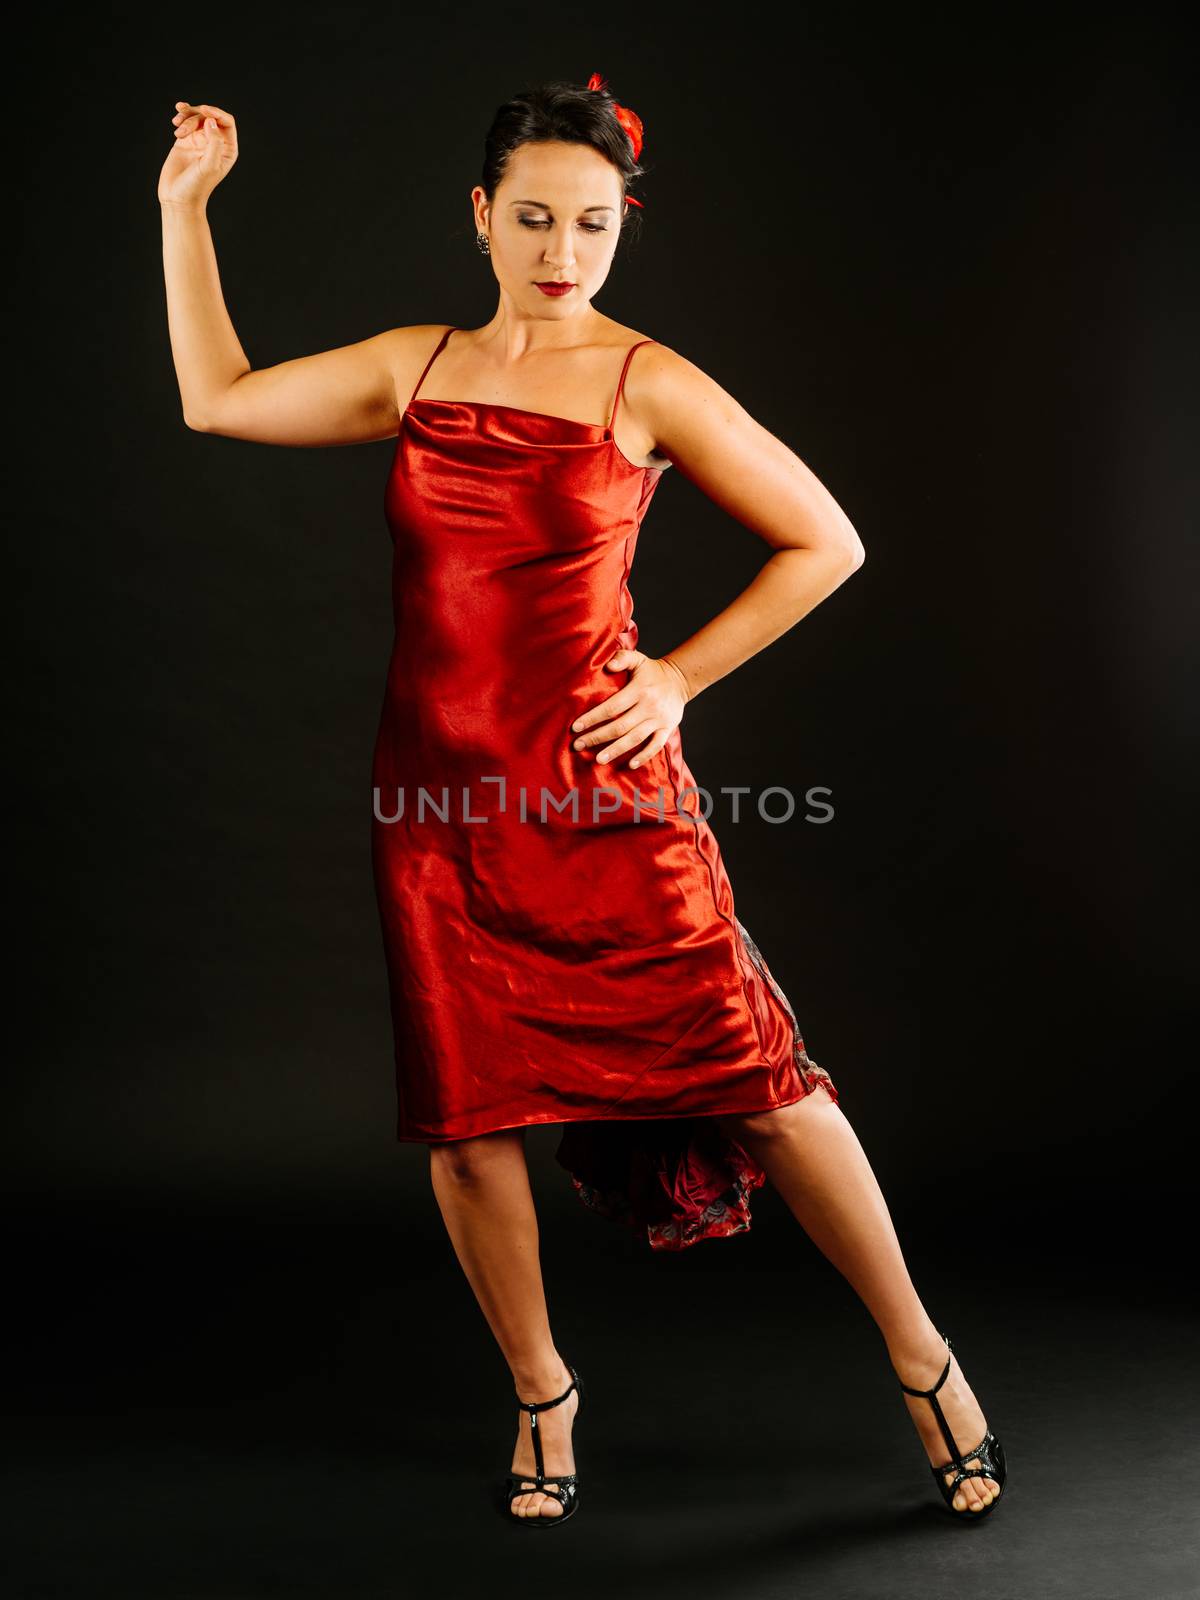 Photo of a beautiful woman performing tango dance moves.